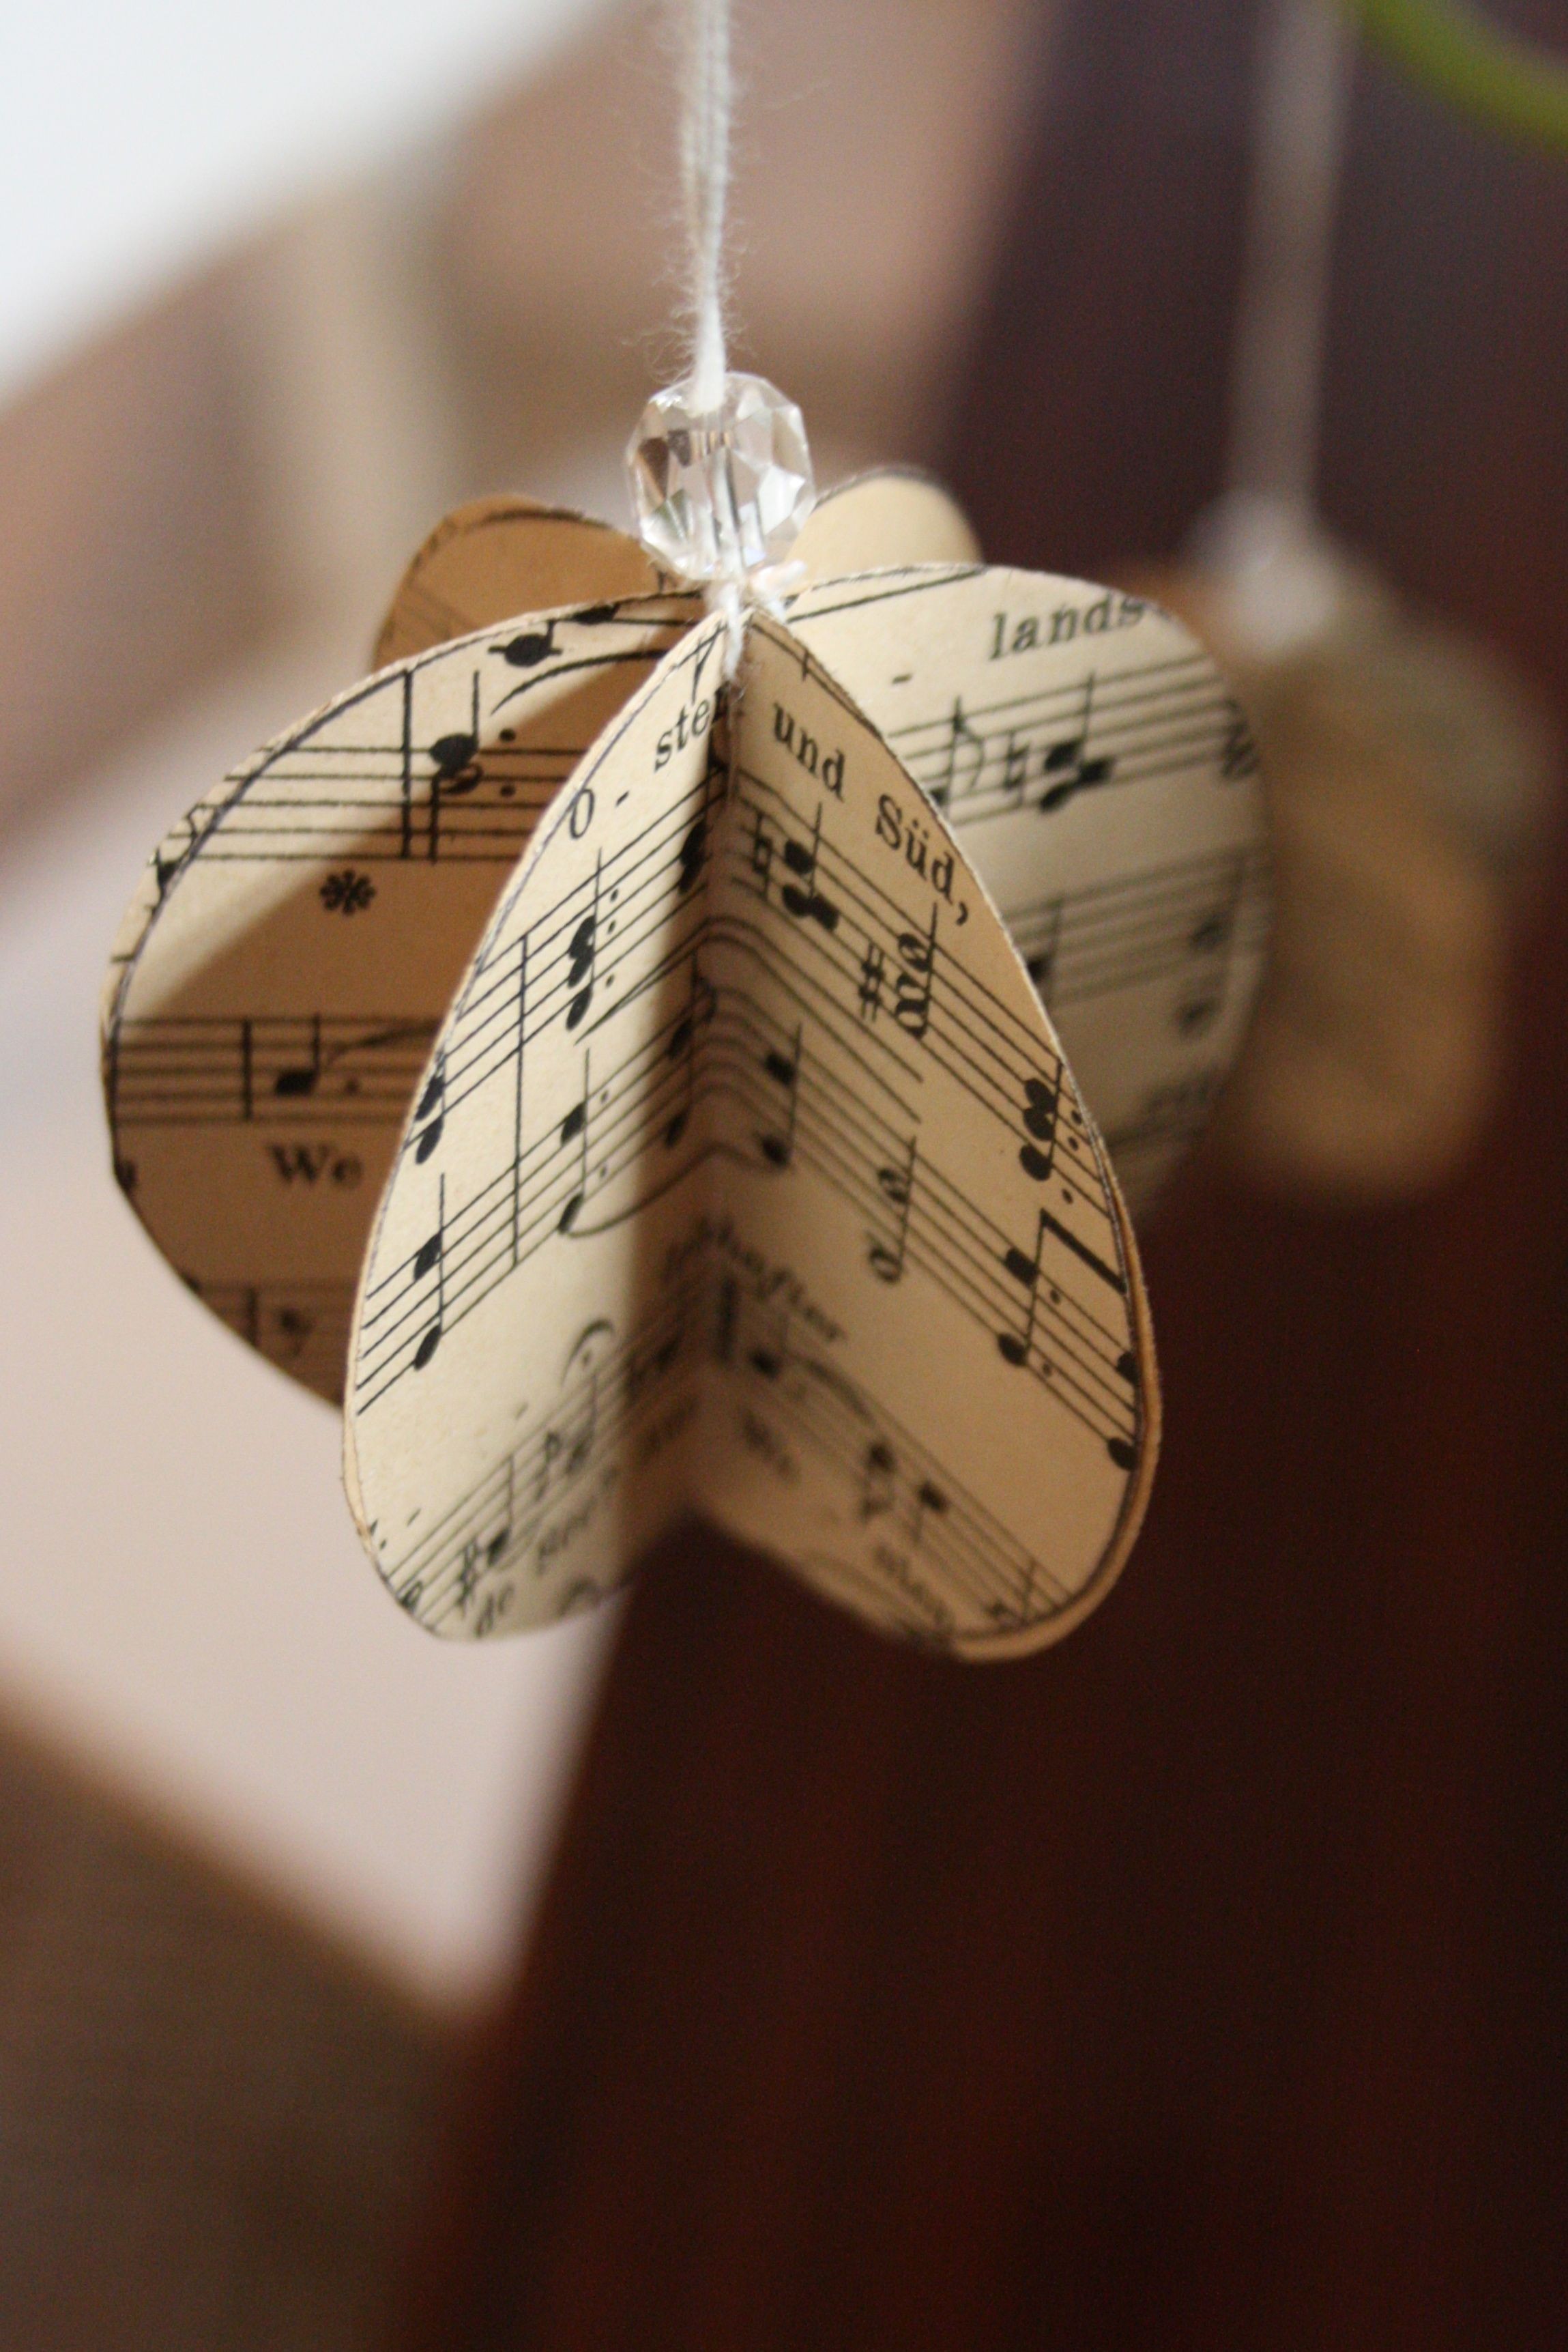 Papercraft Ideas for Christmas these Paper Christmas ornaments are totally Adorable This is Such A